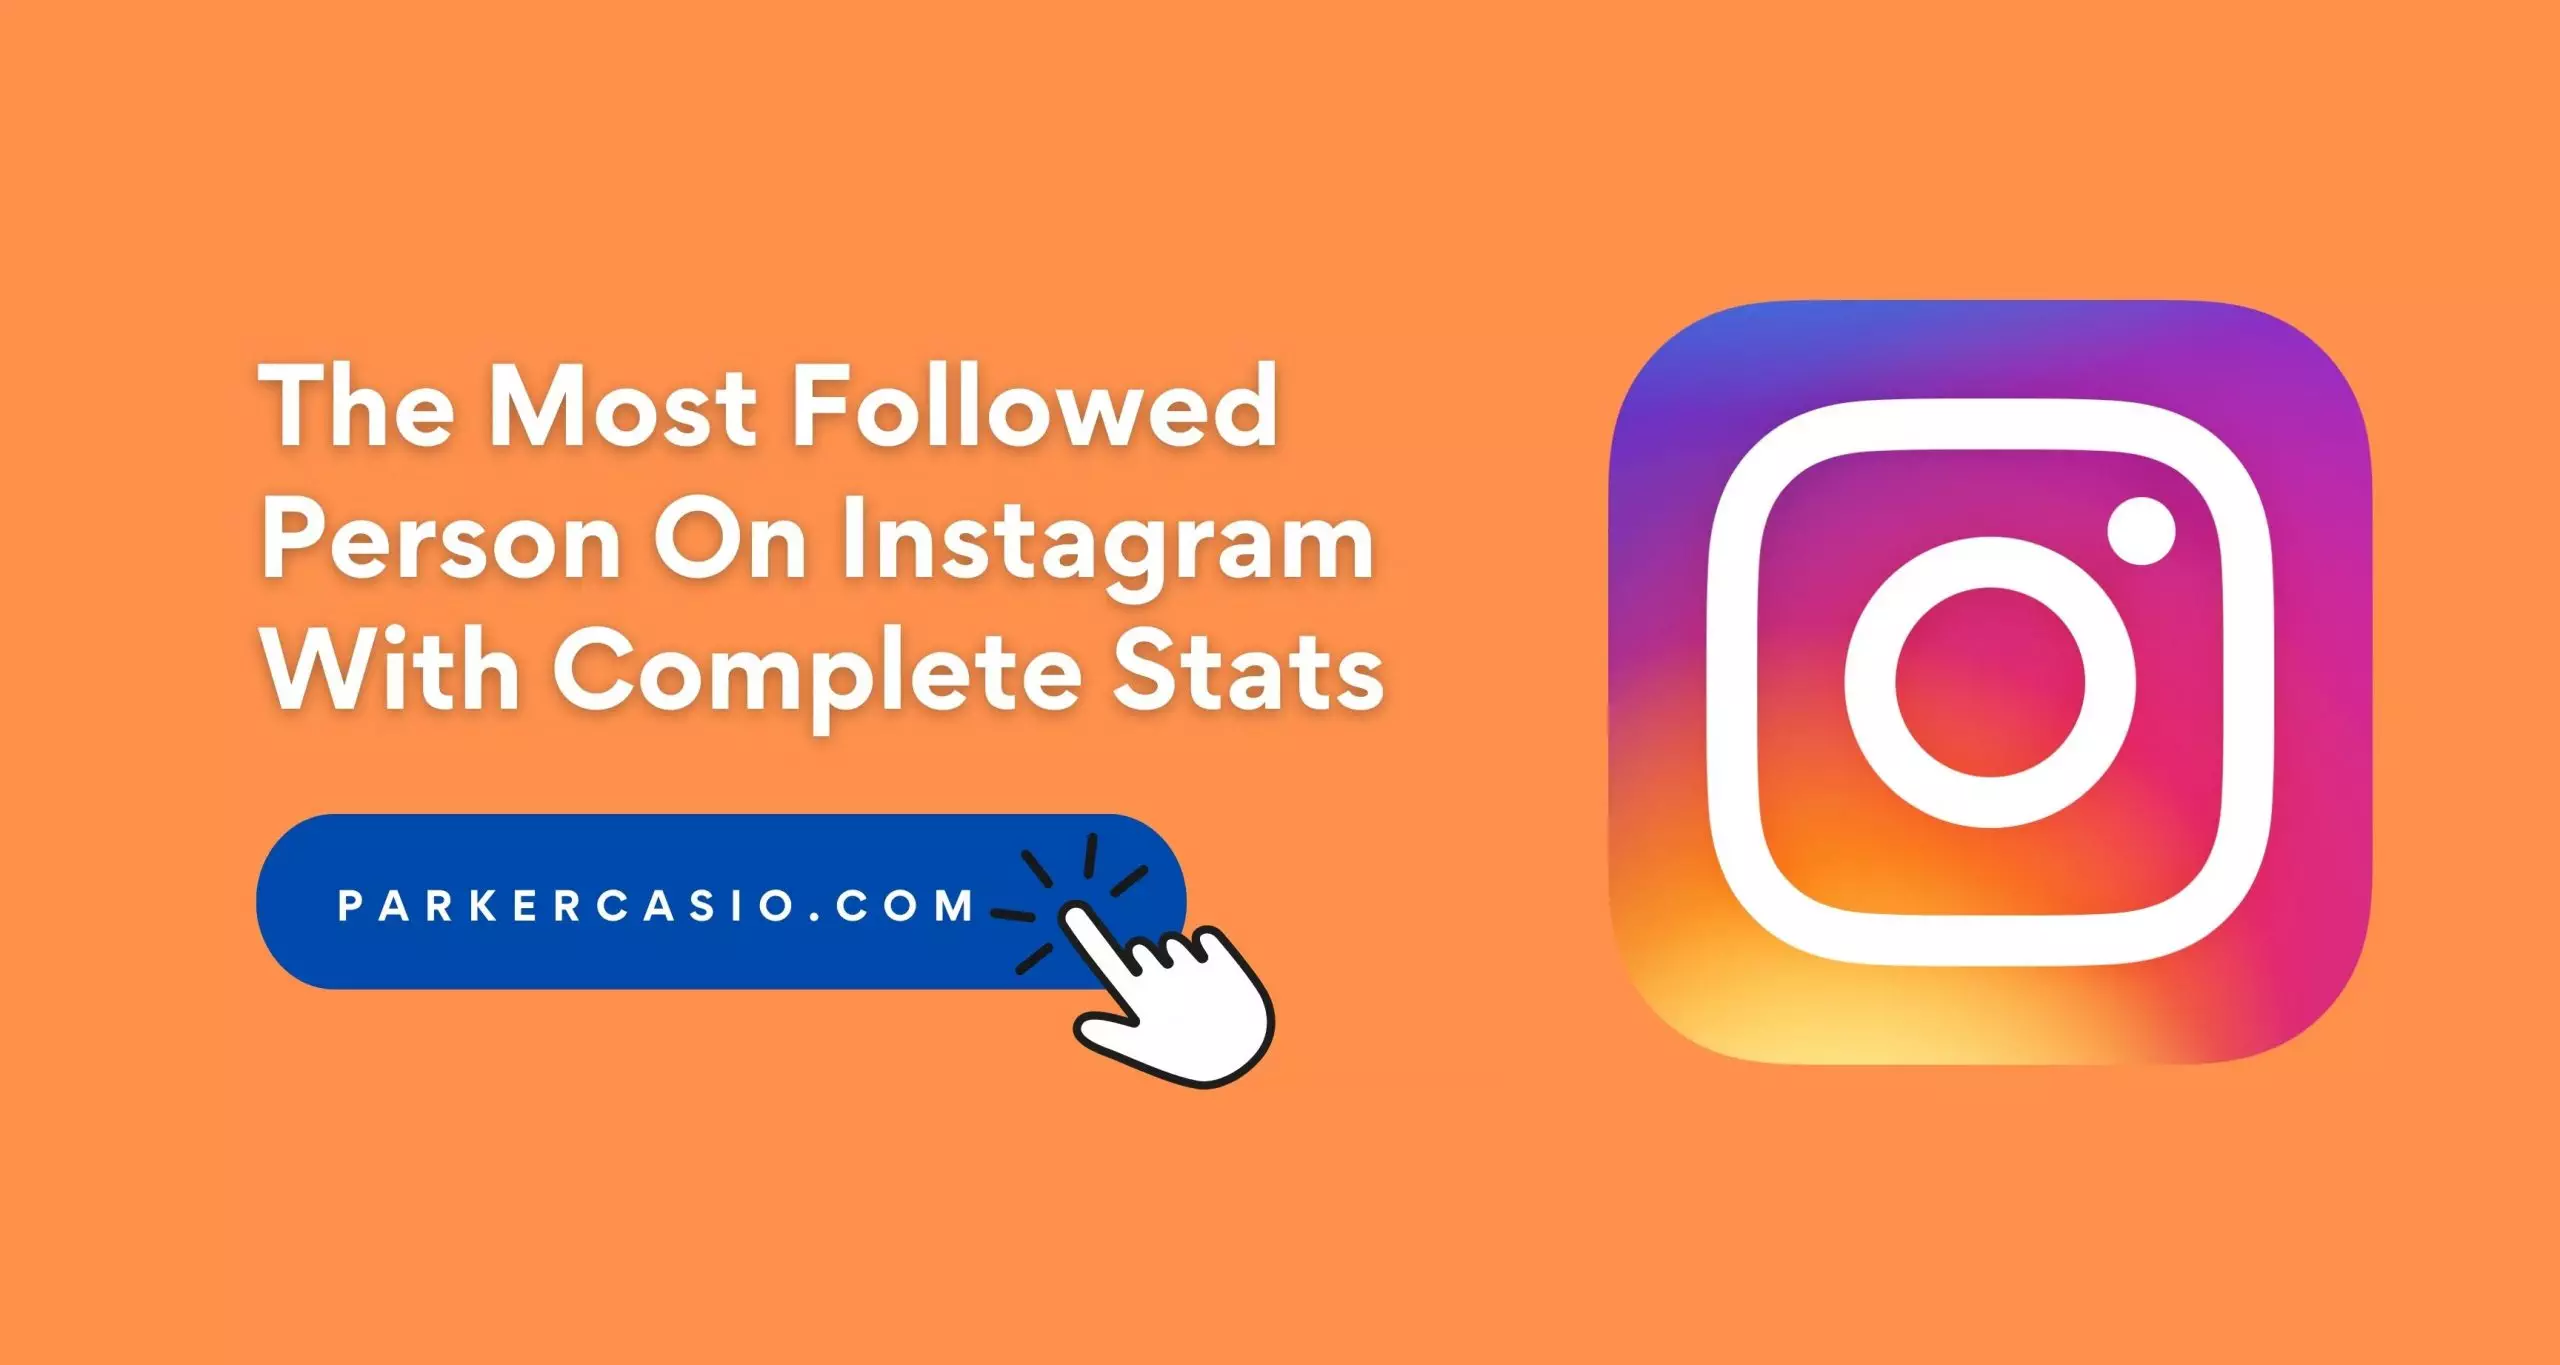 The Most Followed Person On Instagram in June 2021: Complete Statistics